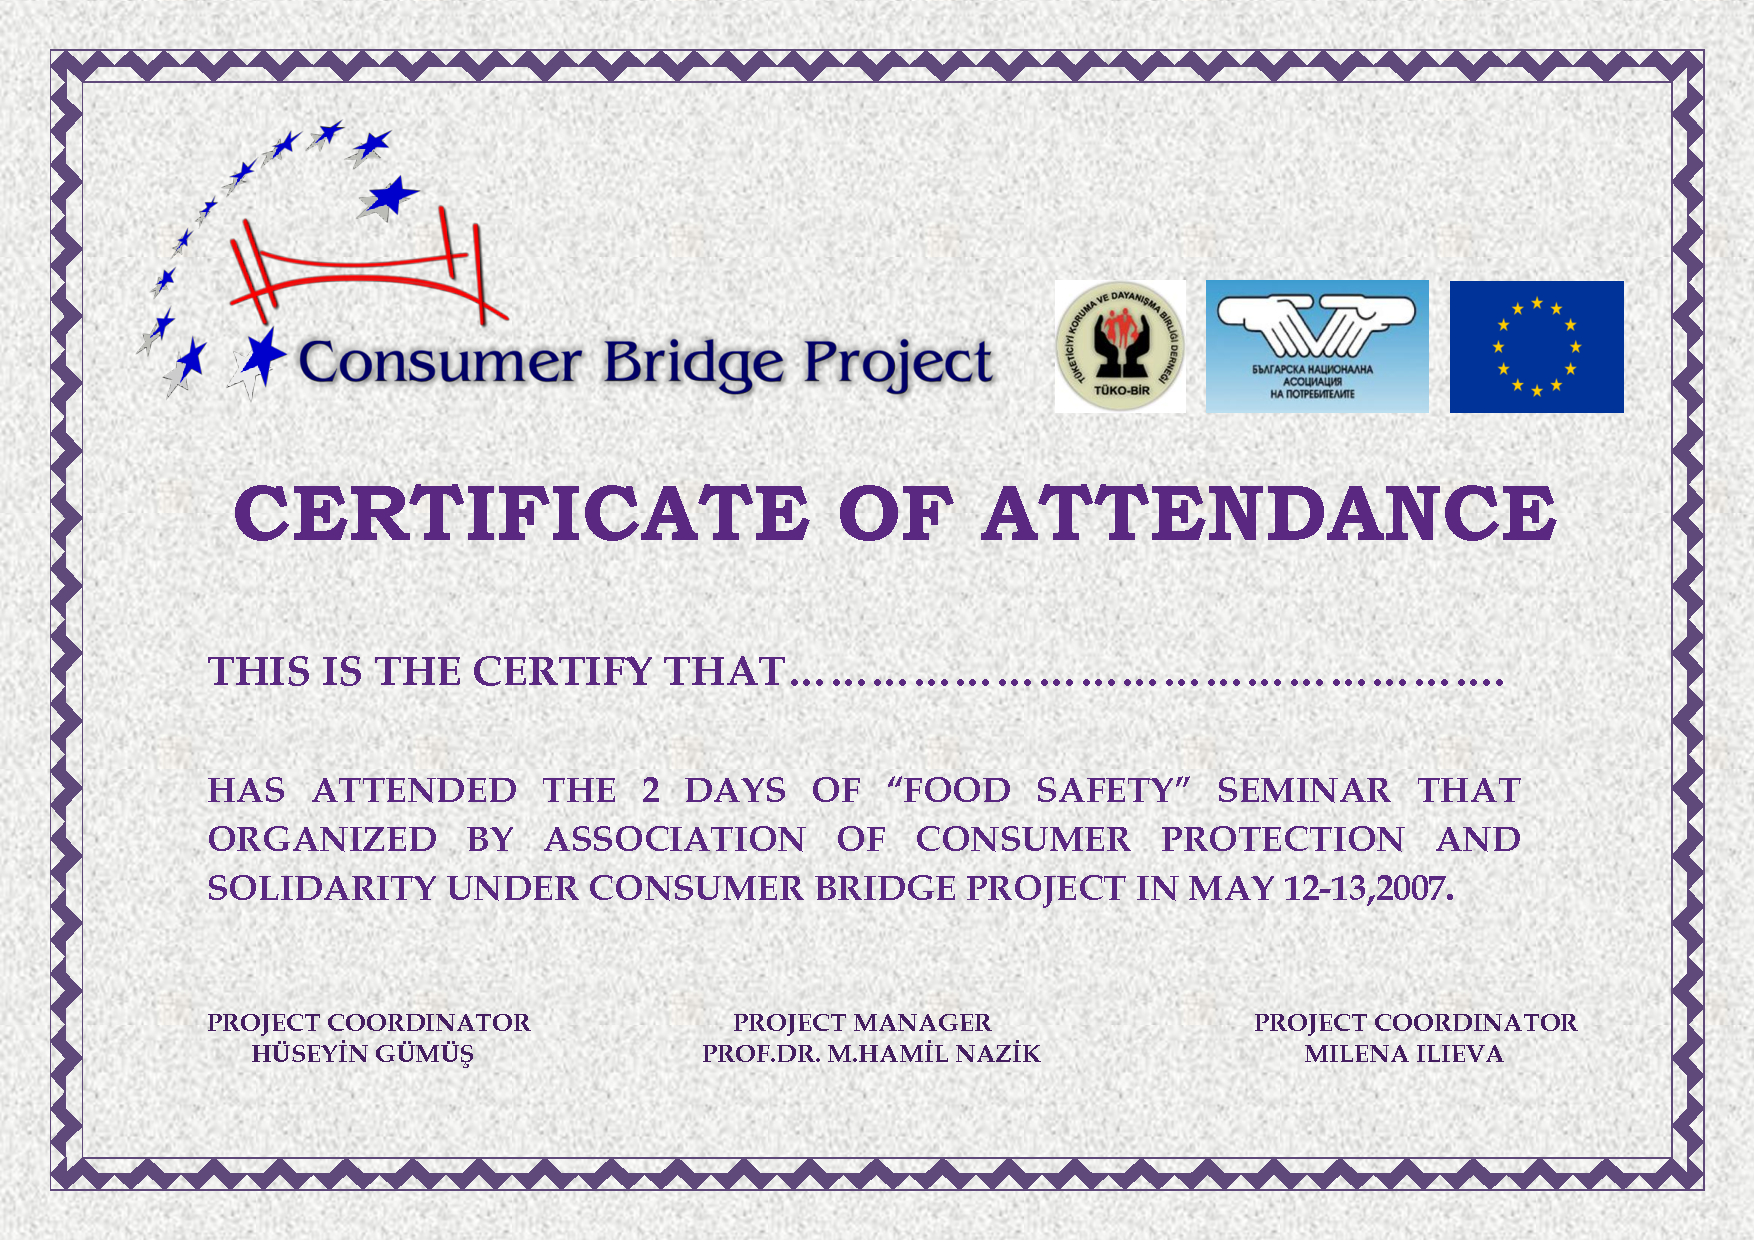 19 Images Of Meeting Attendance Certificate Template For Certificate Of Attendance Conference Template